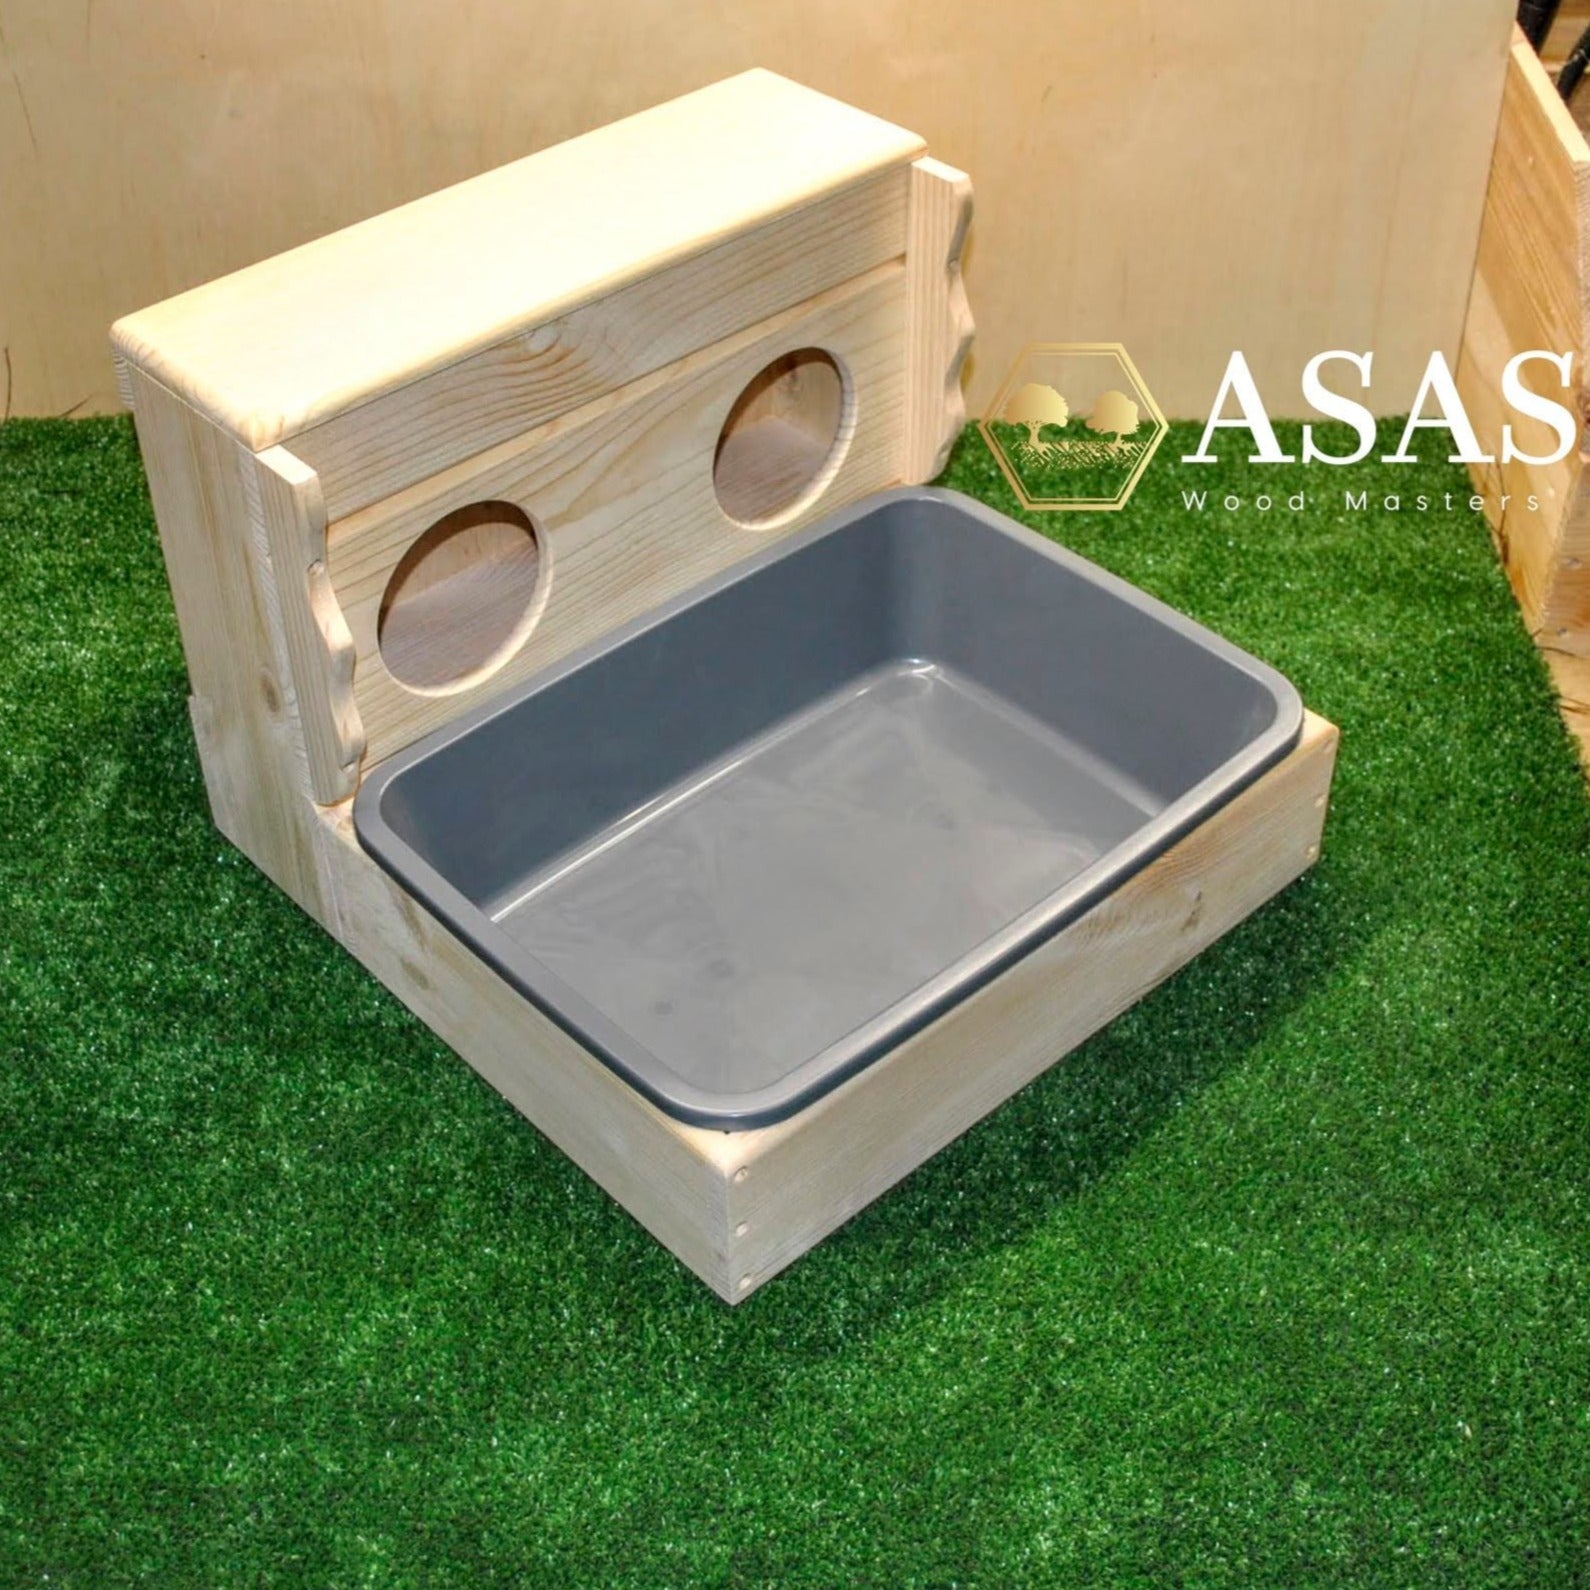 Bunny Hay Feeder with Litter box